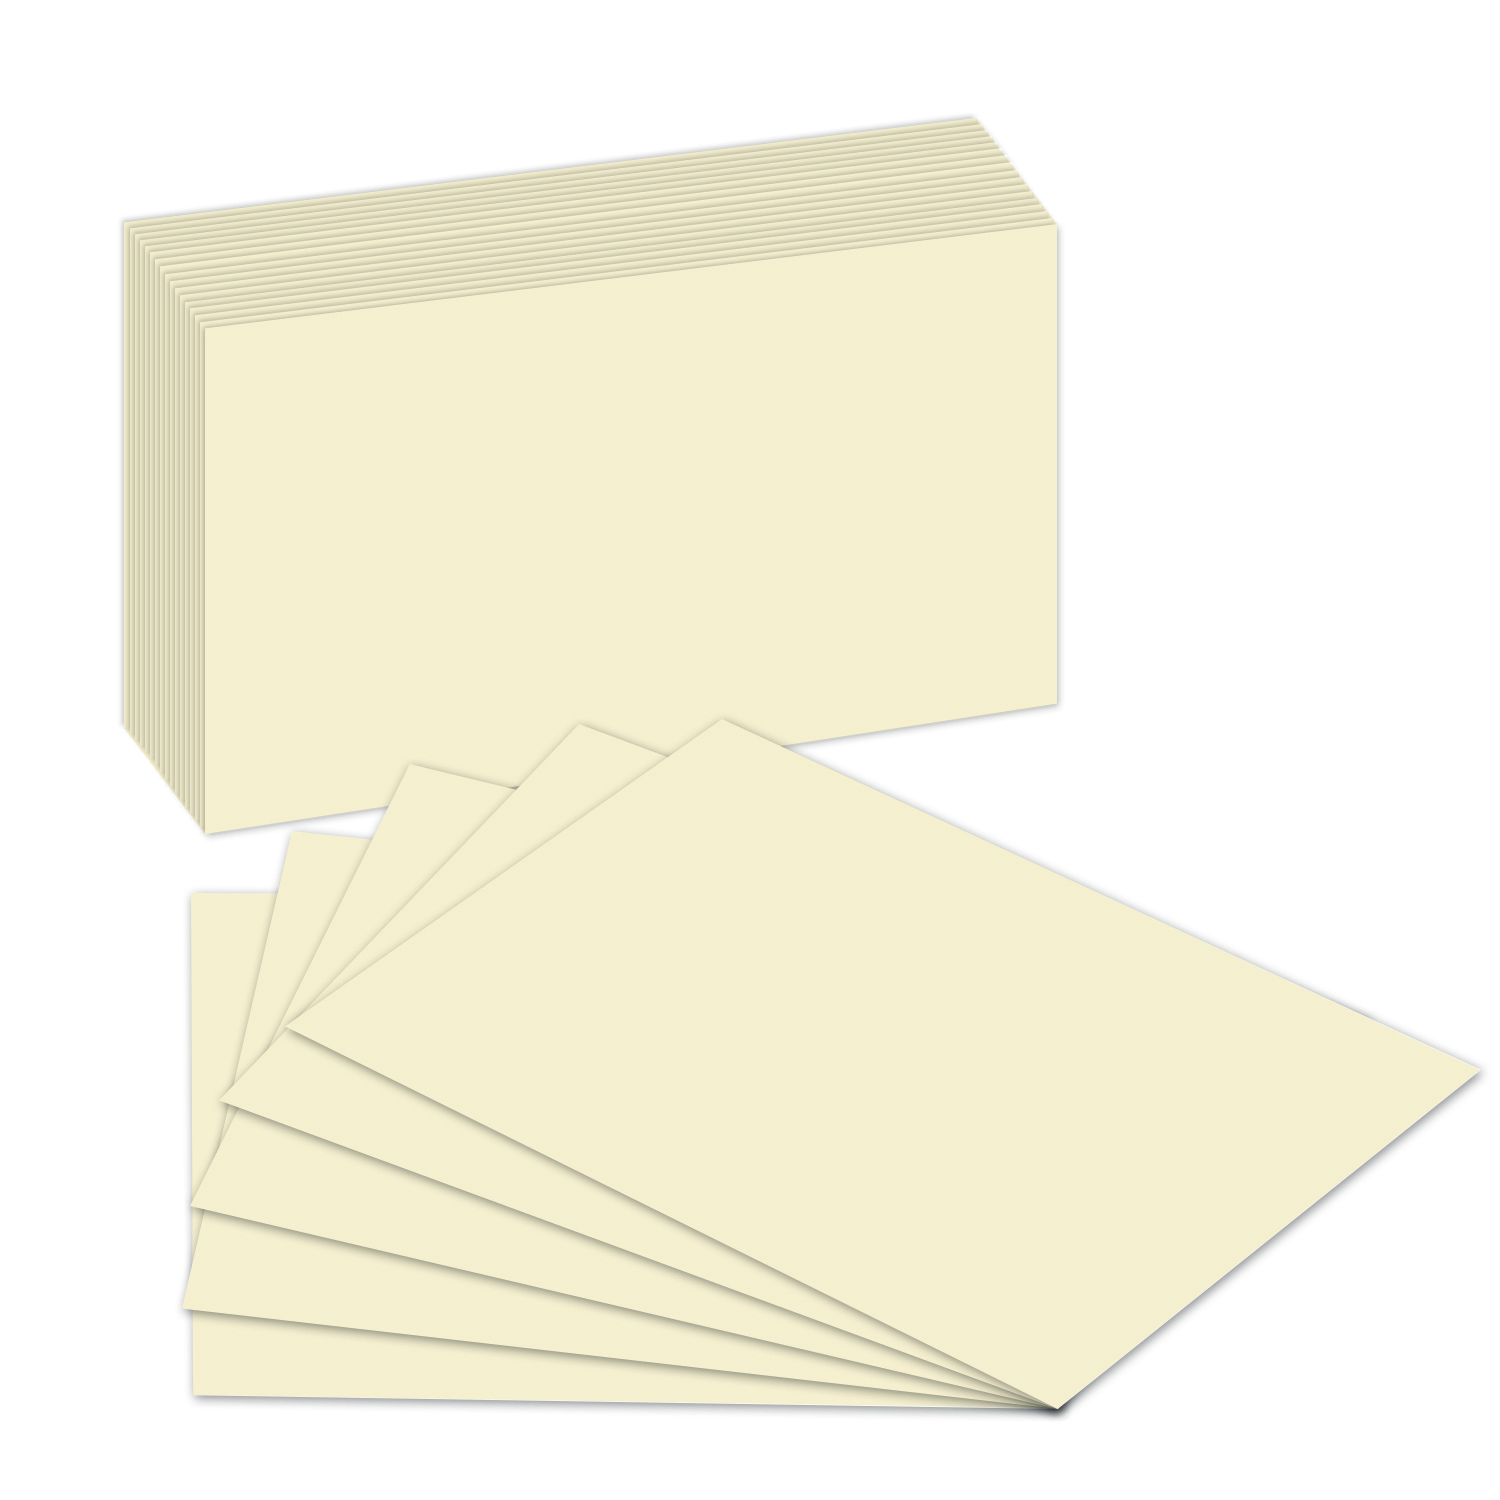 4 x 6 Thick Blank Index Cards - 100lb Cardstock (14pt) - 100